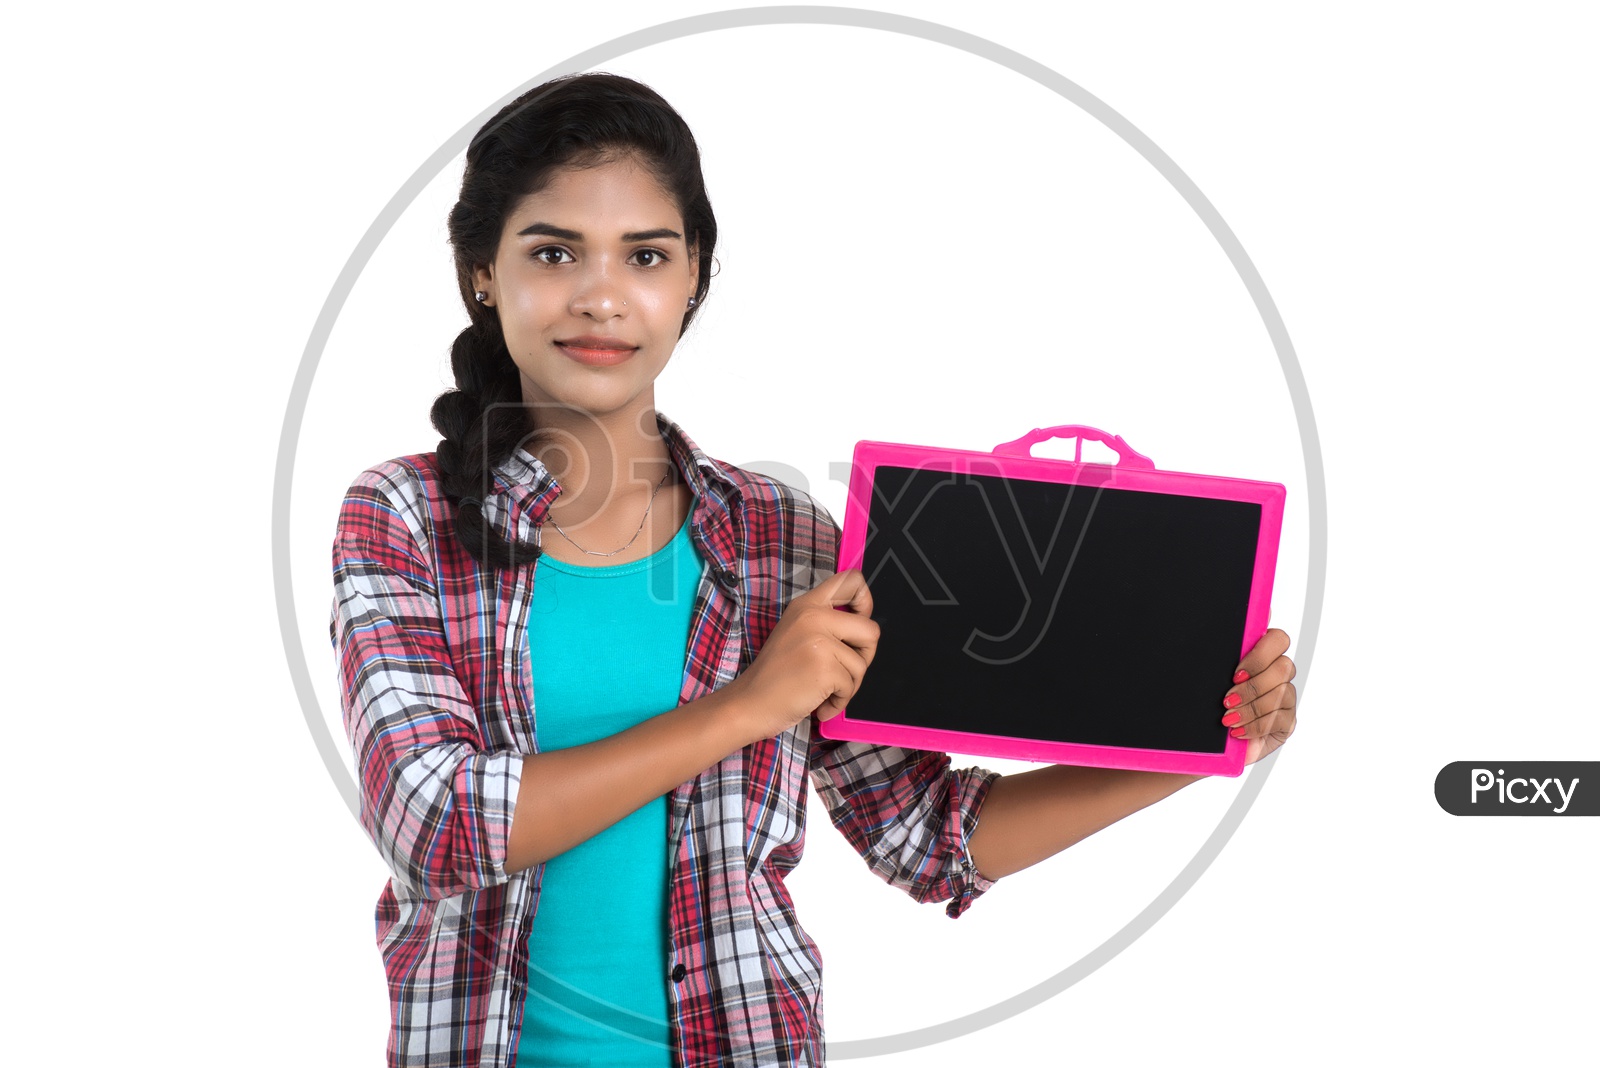 Young Indian Woman Holding Blank Slate Board and Showing The Empty Space On White Background